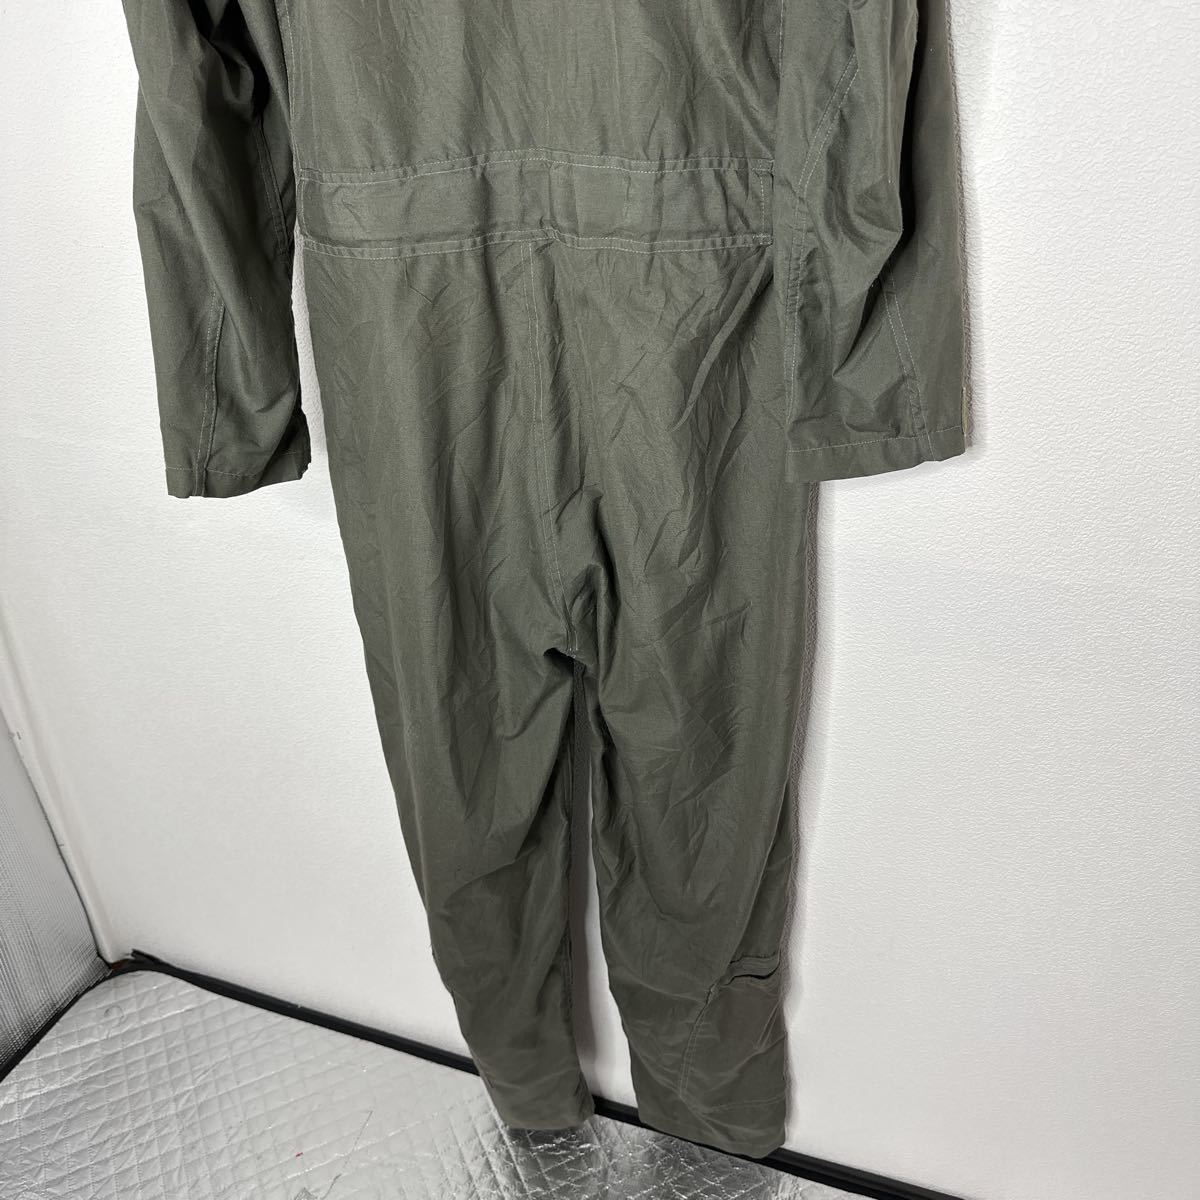 COVERALLS,FLYERS, SUMMER, FIRE RESISTANT CWU-27/P ■NO.6011-92■8415-01-043-8390 ■100% NON-MELTING AROMATIC 米軍 フライトスーツ 1_画像7